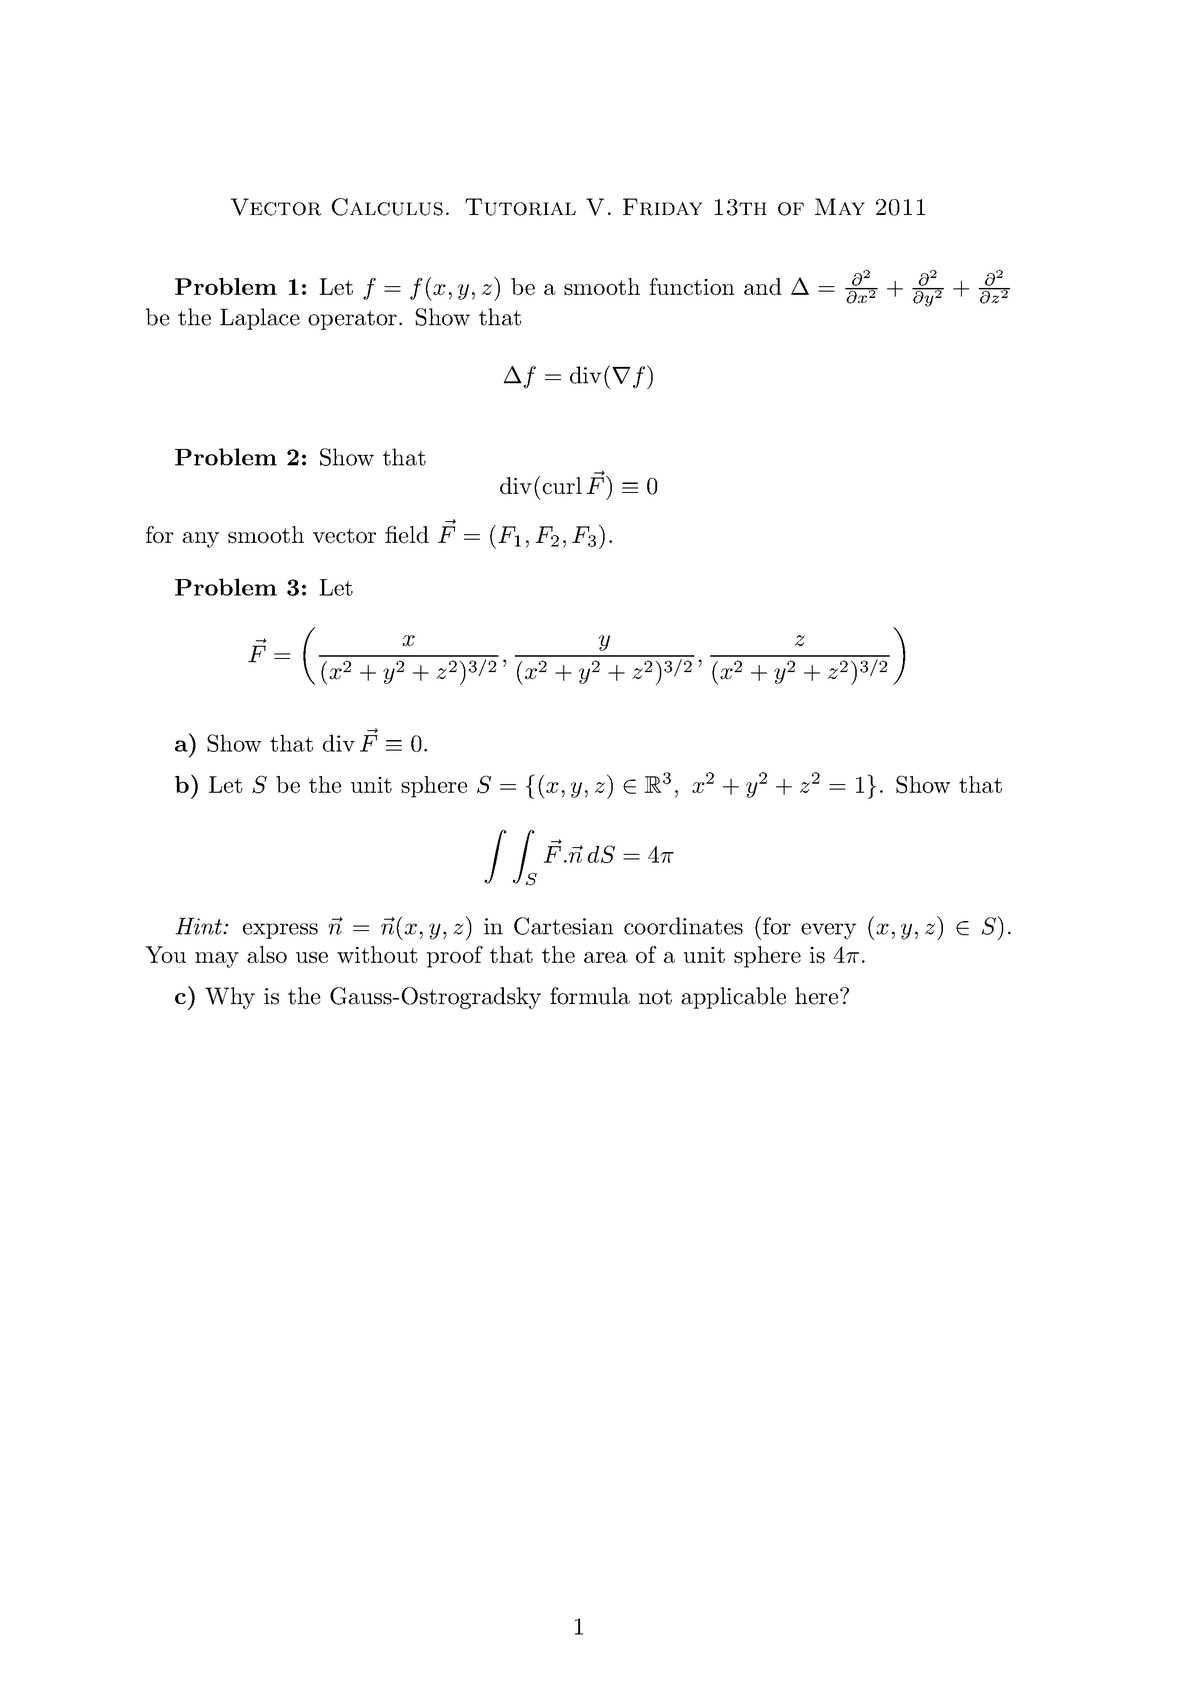 Mat1005 10 11 Tutorial 5 Vector Calculus Tutorial Friday 13th Of May 11 Problem Let Be Smooth Function And Be The Laplace Operator Show That X2 Div Studocu